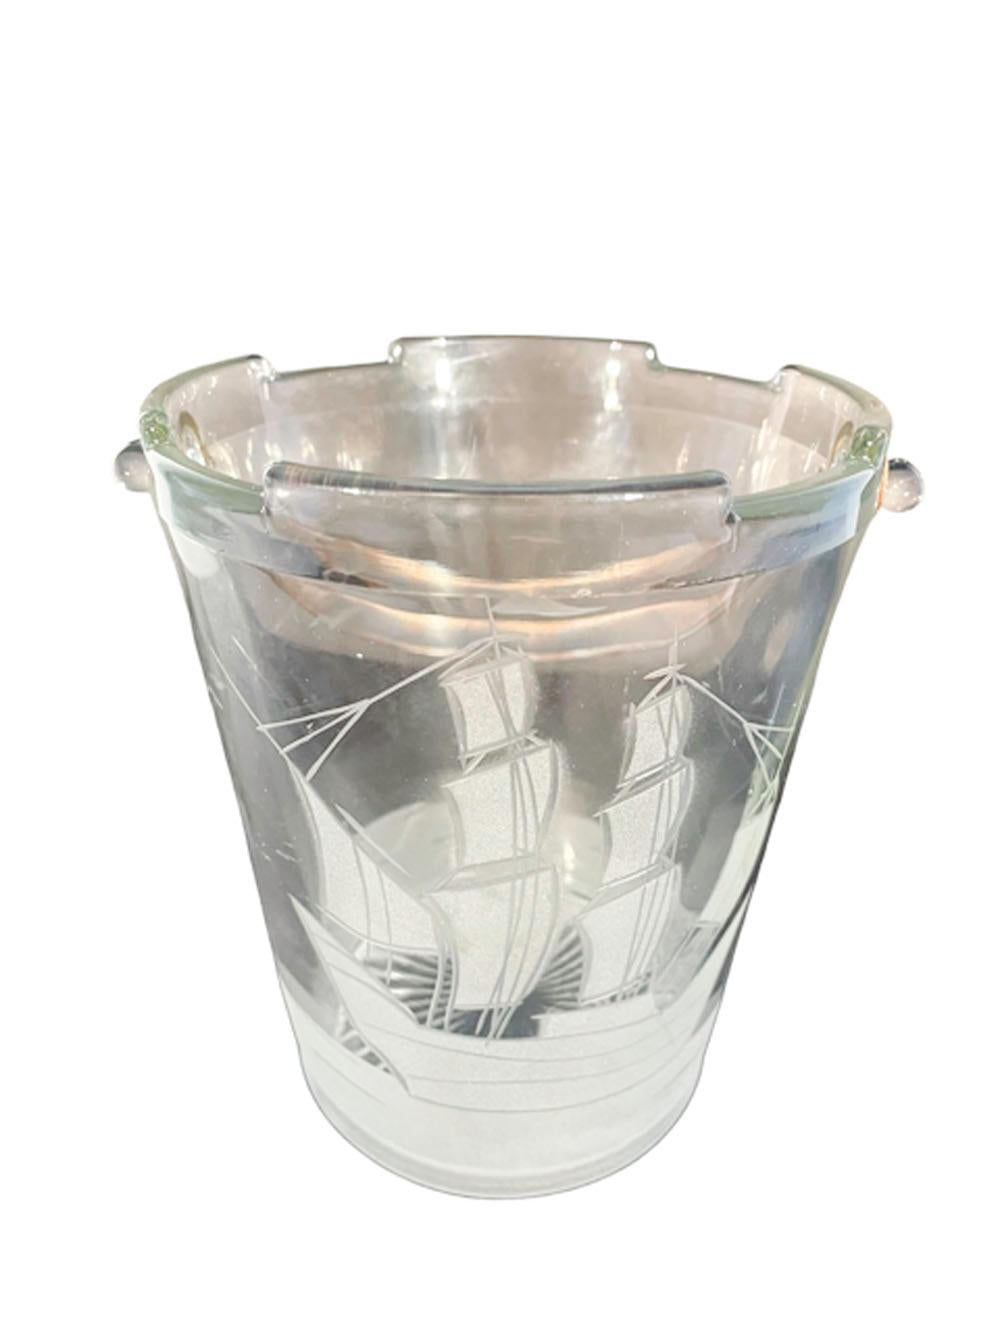 Clear glass Art Deco ice bucket of pail form with a starburst molded base and shaped rim with hammered metal handle, and with a sailing ship etched on the front with the water extending around the base and birds in flight to the back.